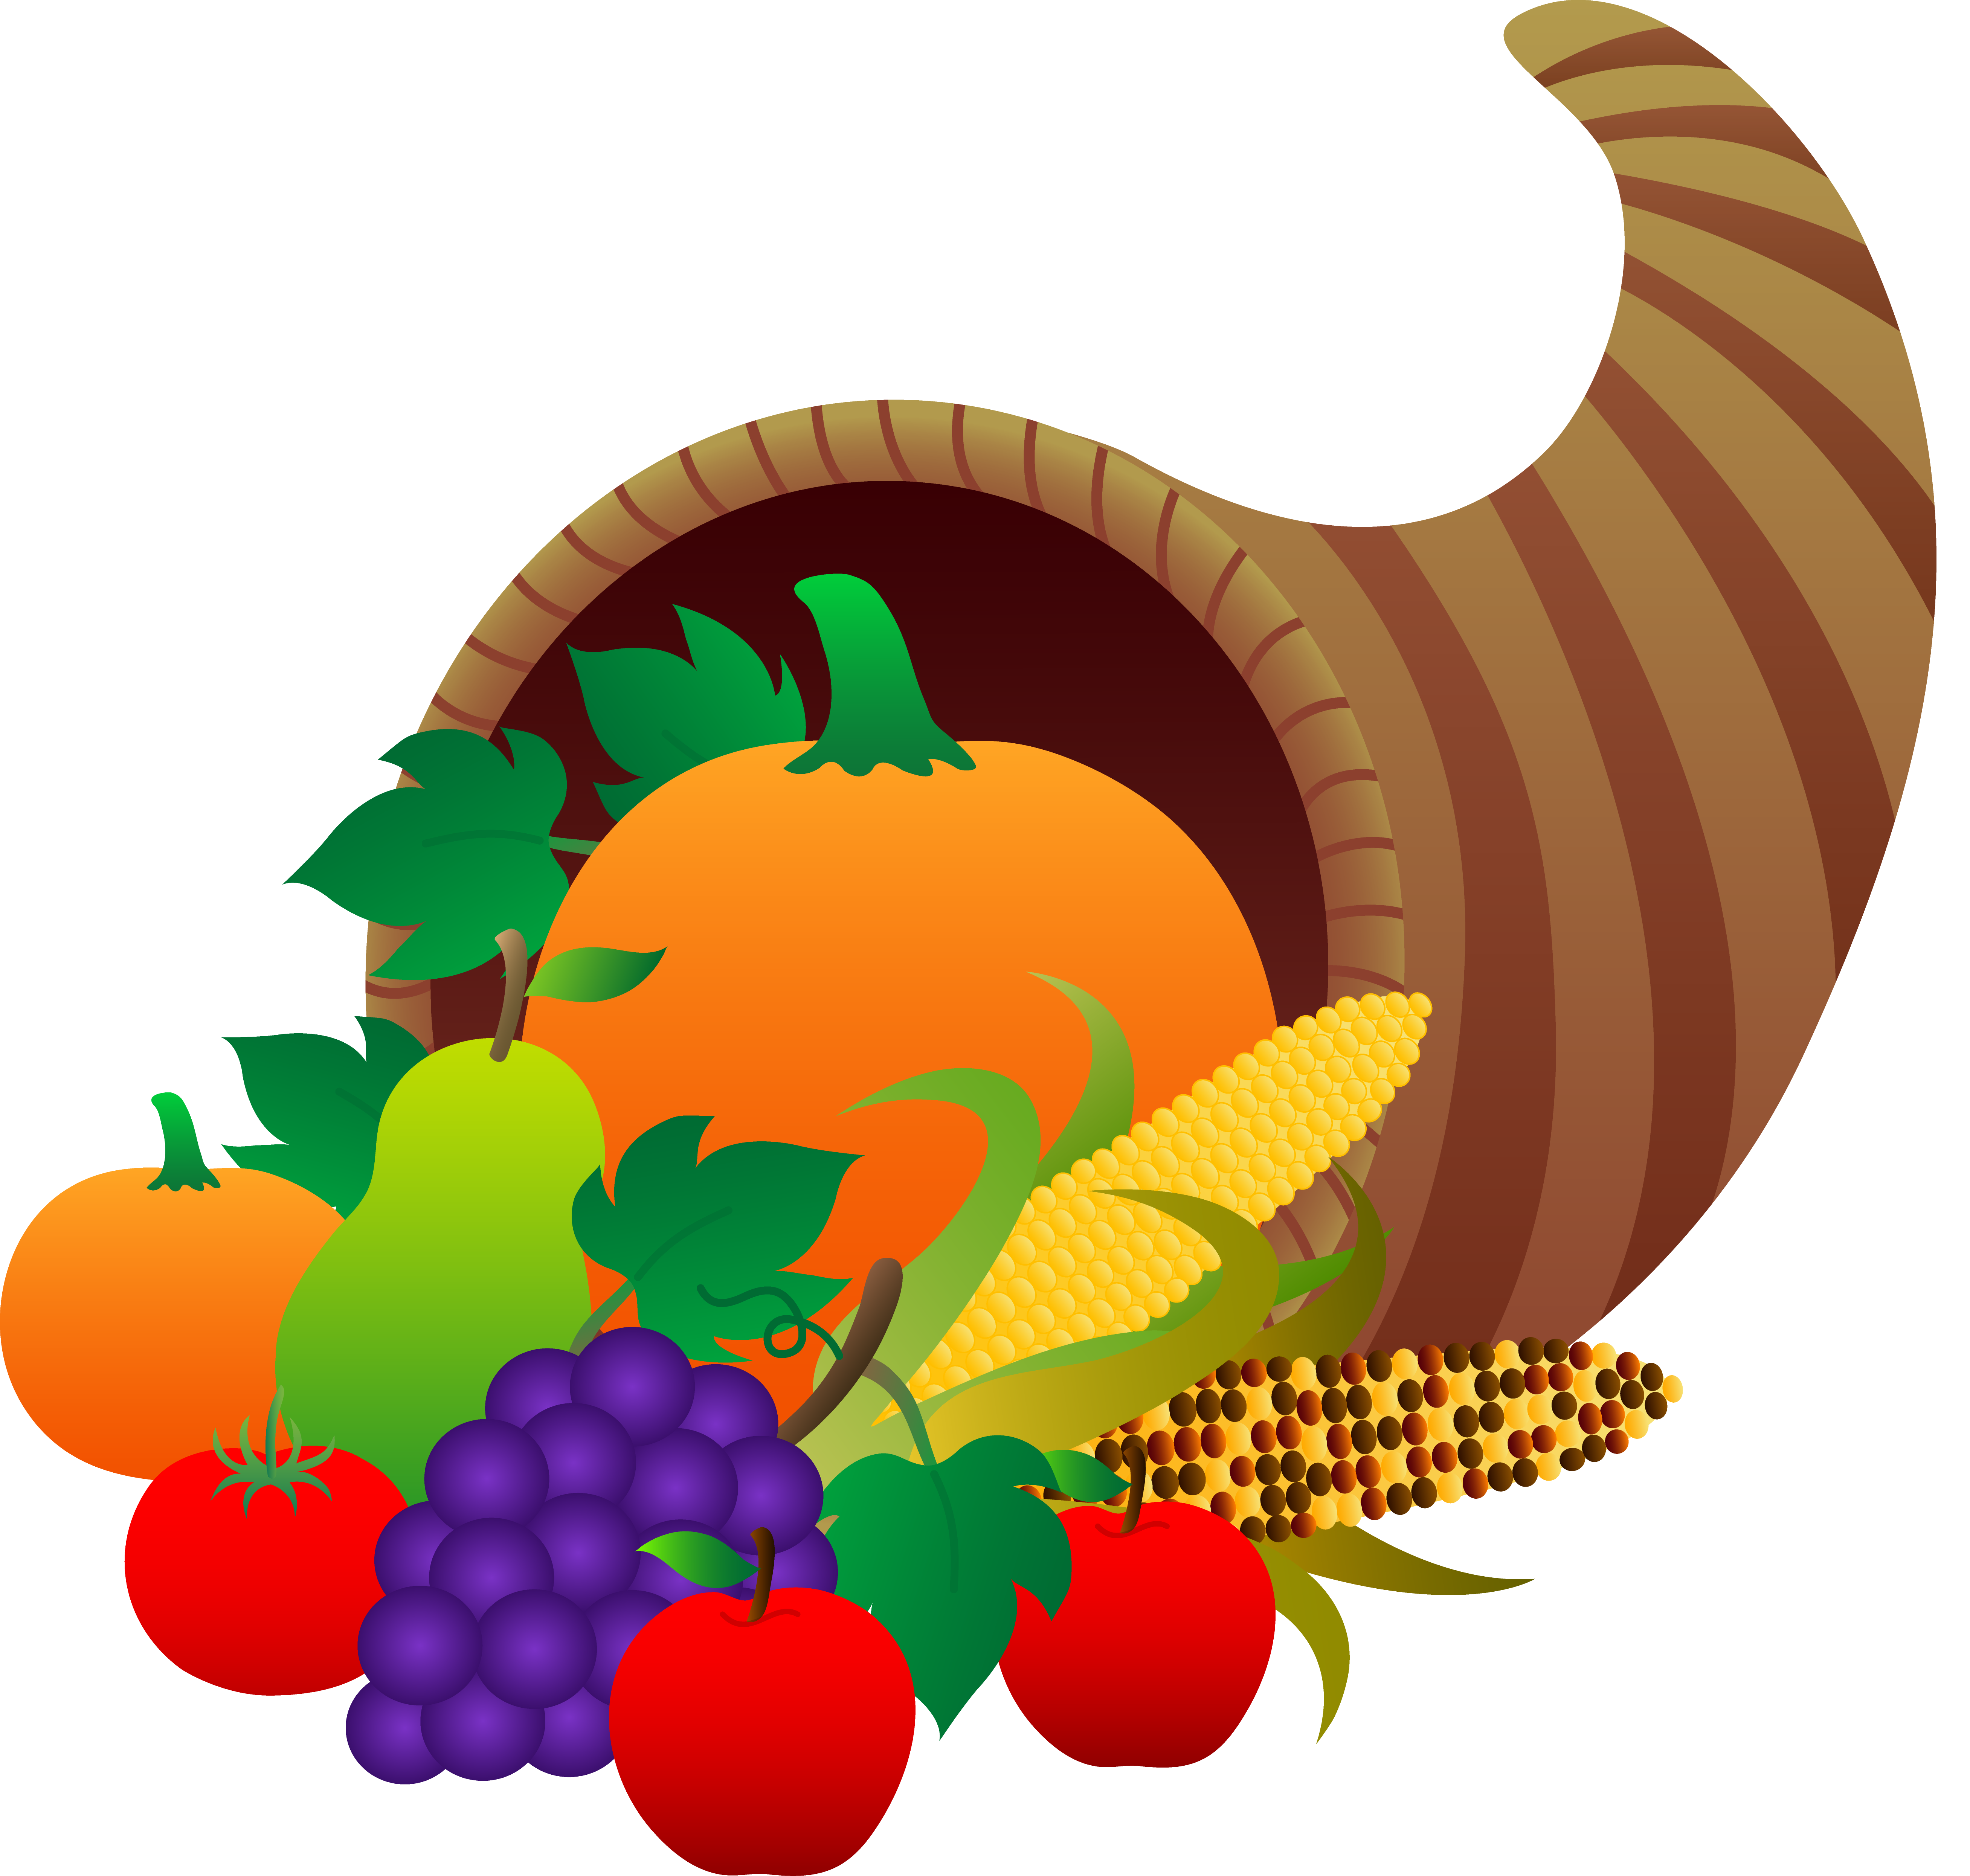 Free clipart images harvest